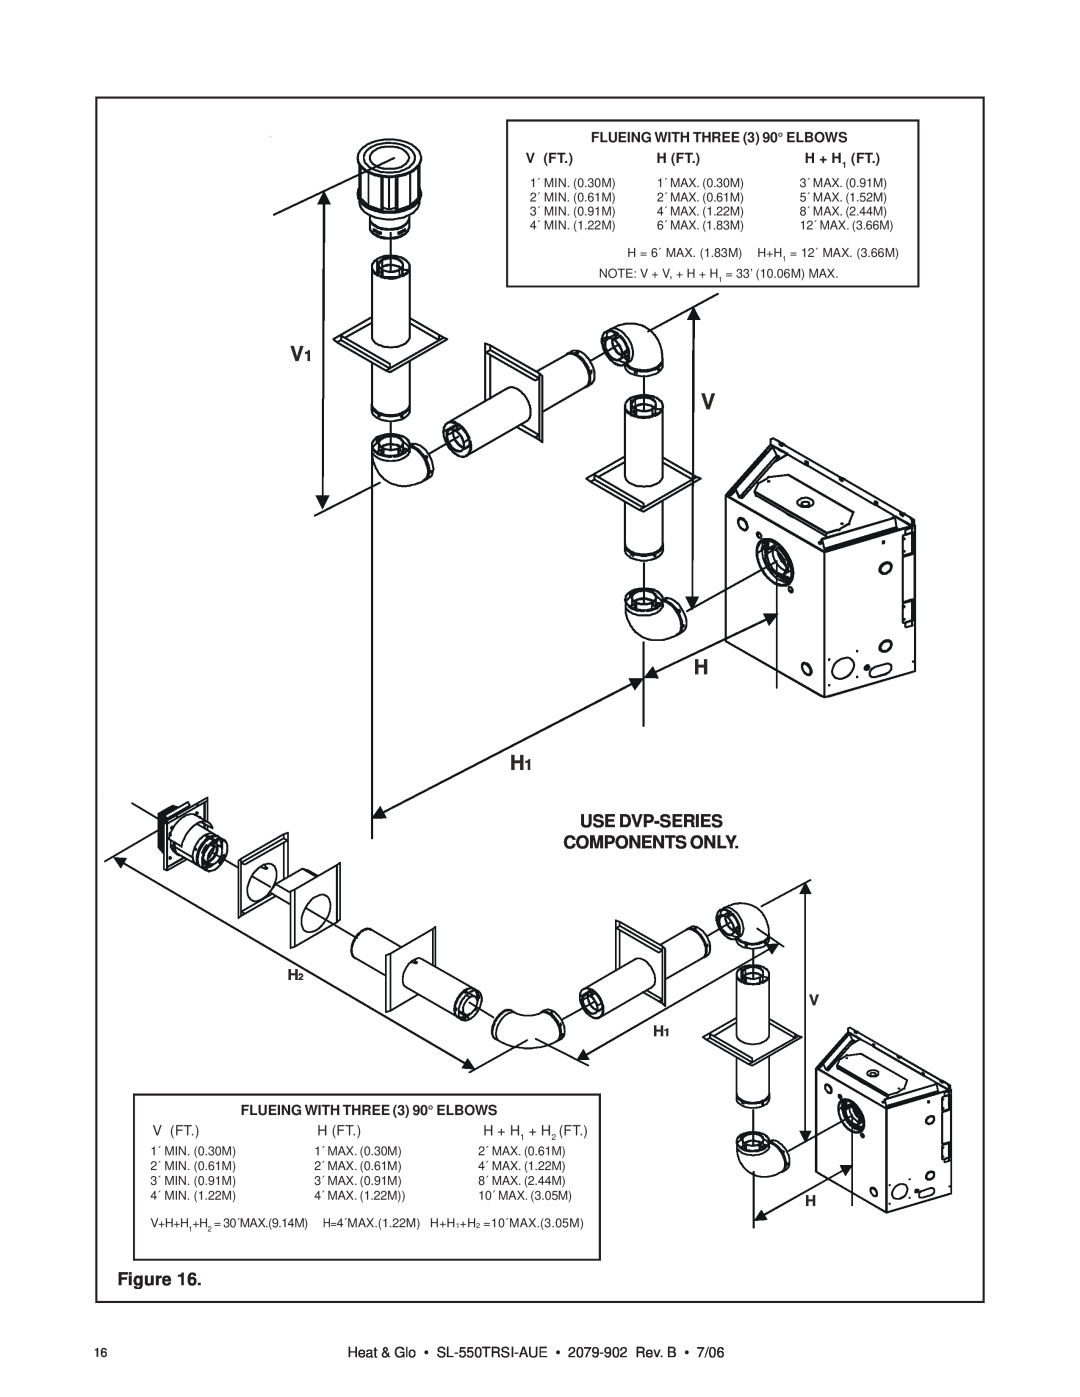 Hearth and Home Technologies SL-550TRSI-AUE Use Dvp-Series, Components Only, FLUEING WITH THREE 3 90 ELBOWS, V Ft, H Ft 